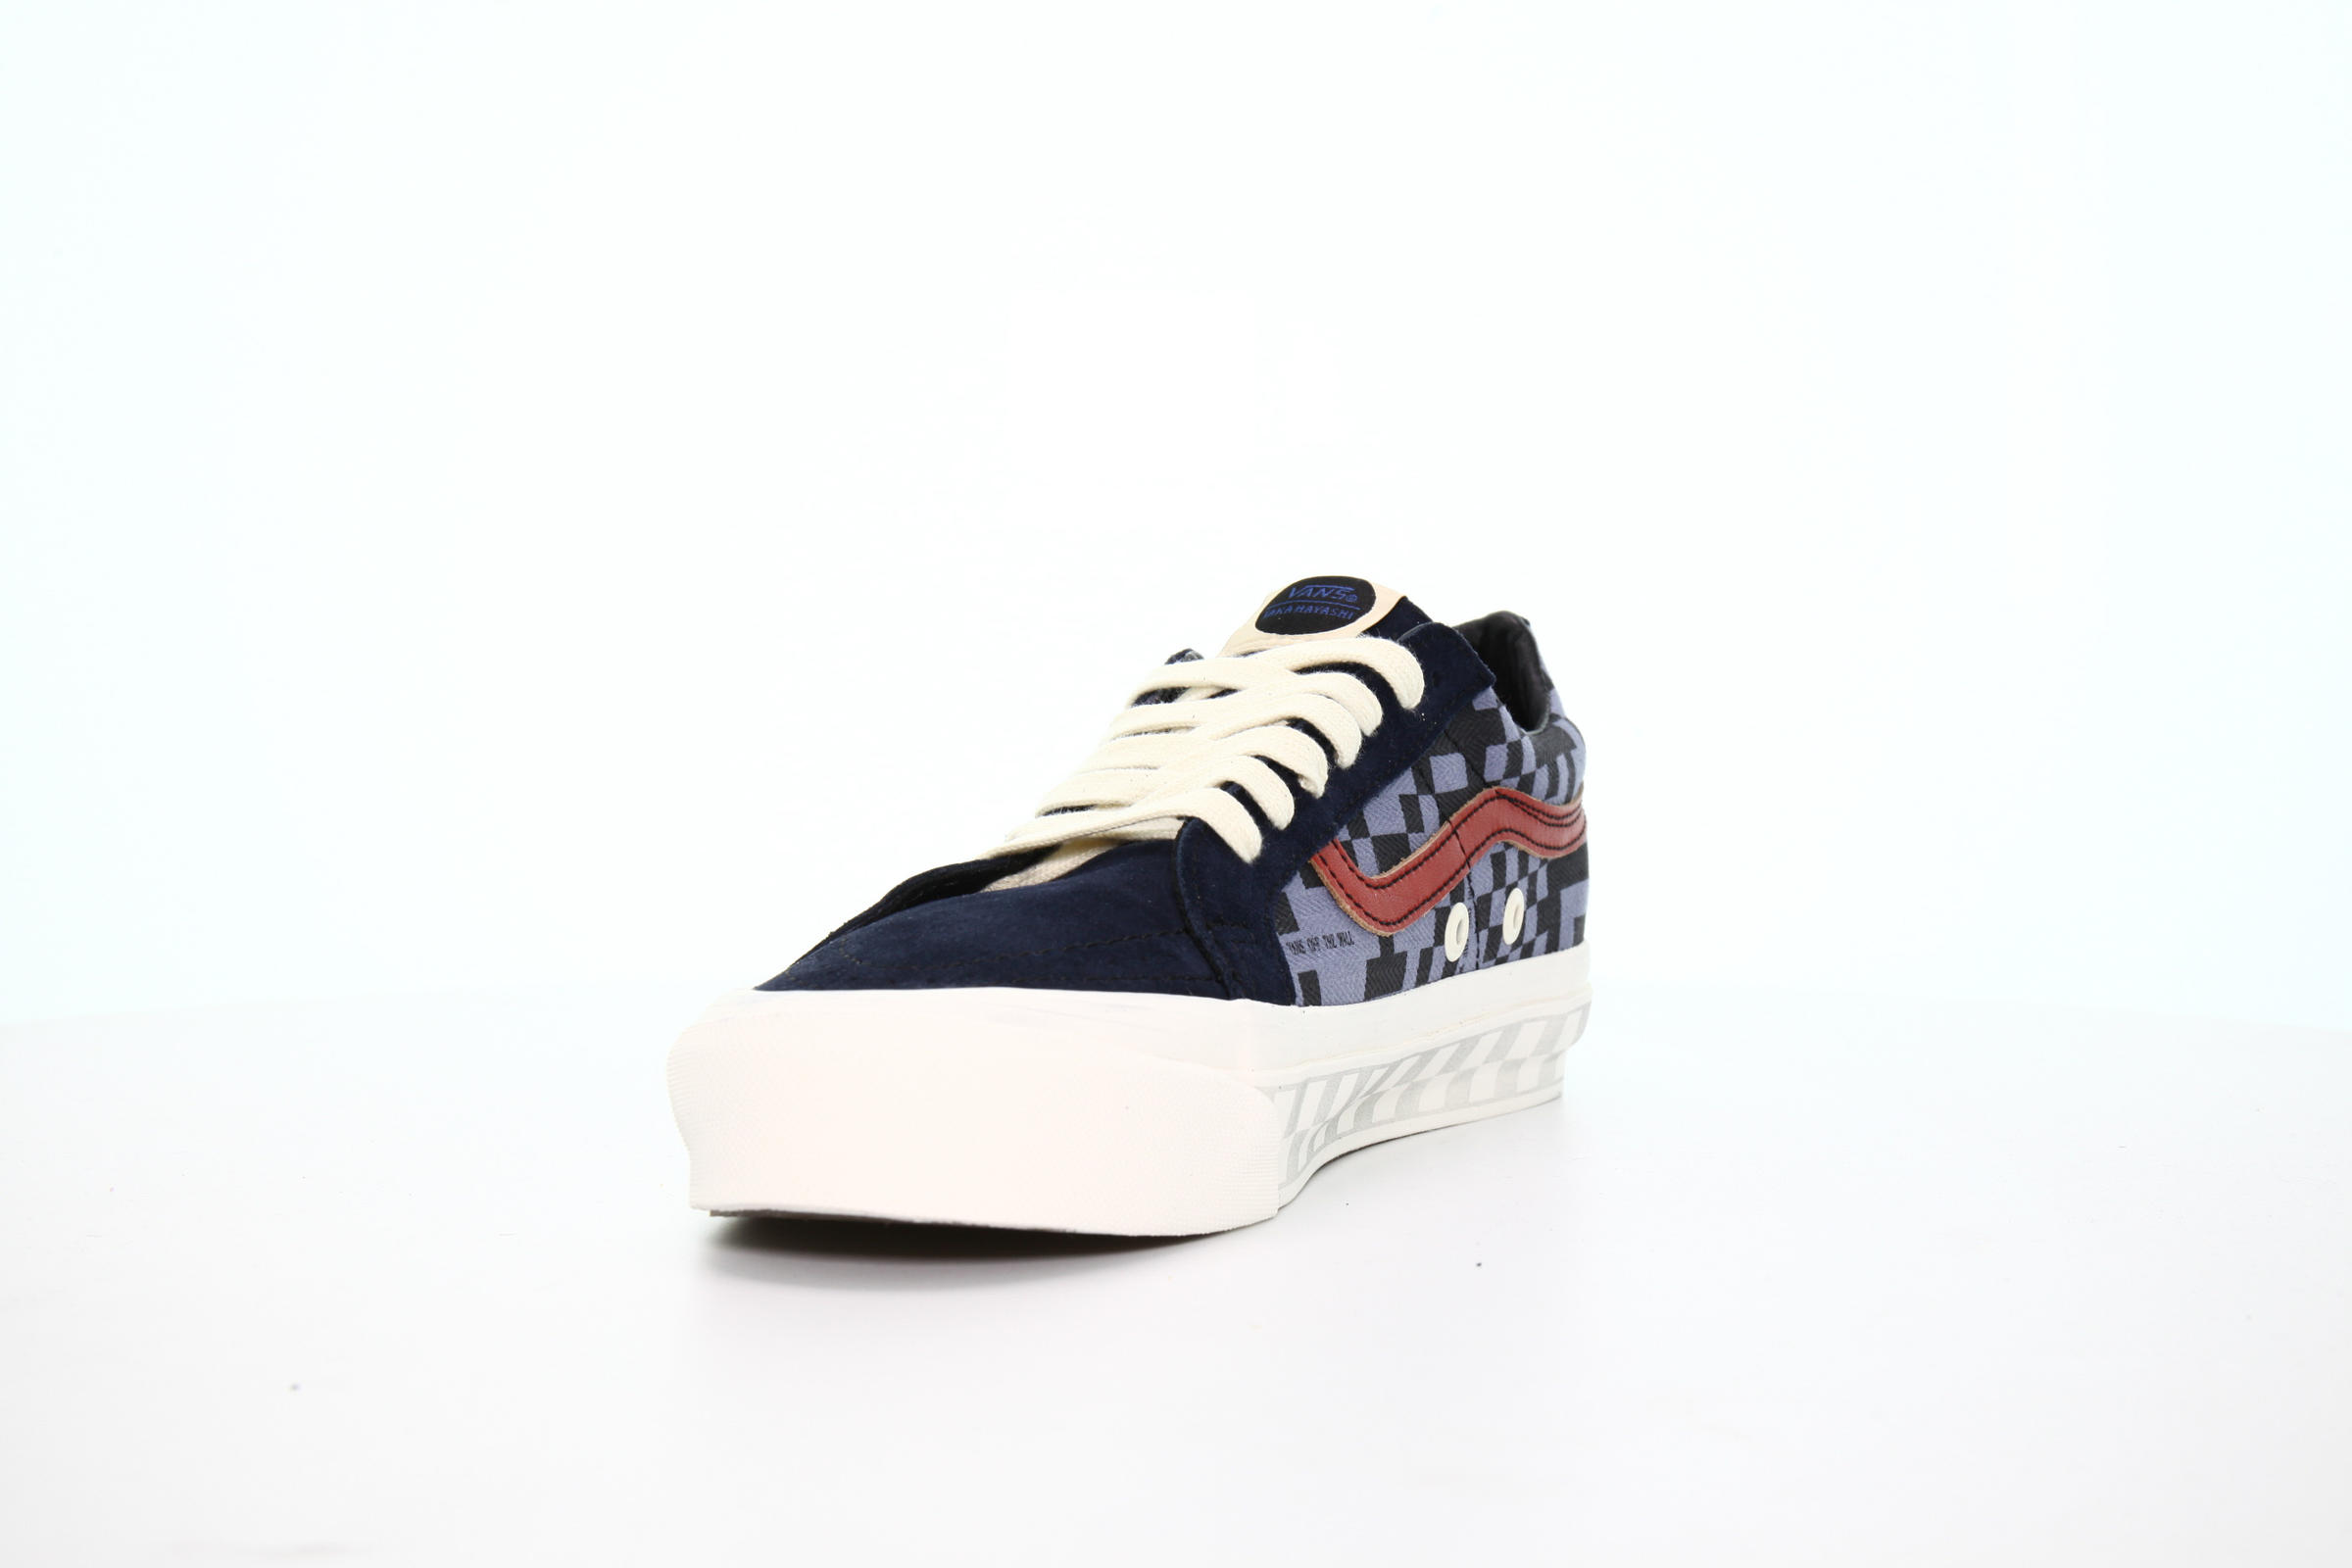 Vans TH SK8-Lo Reissue LX "Totale Clips"